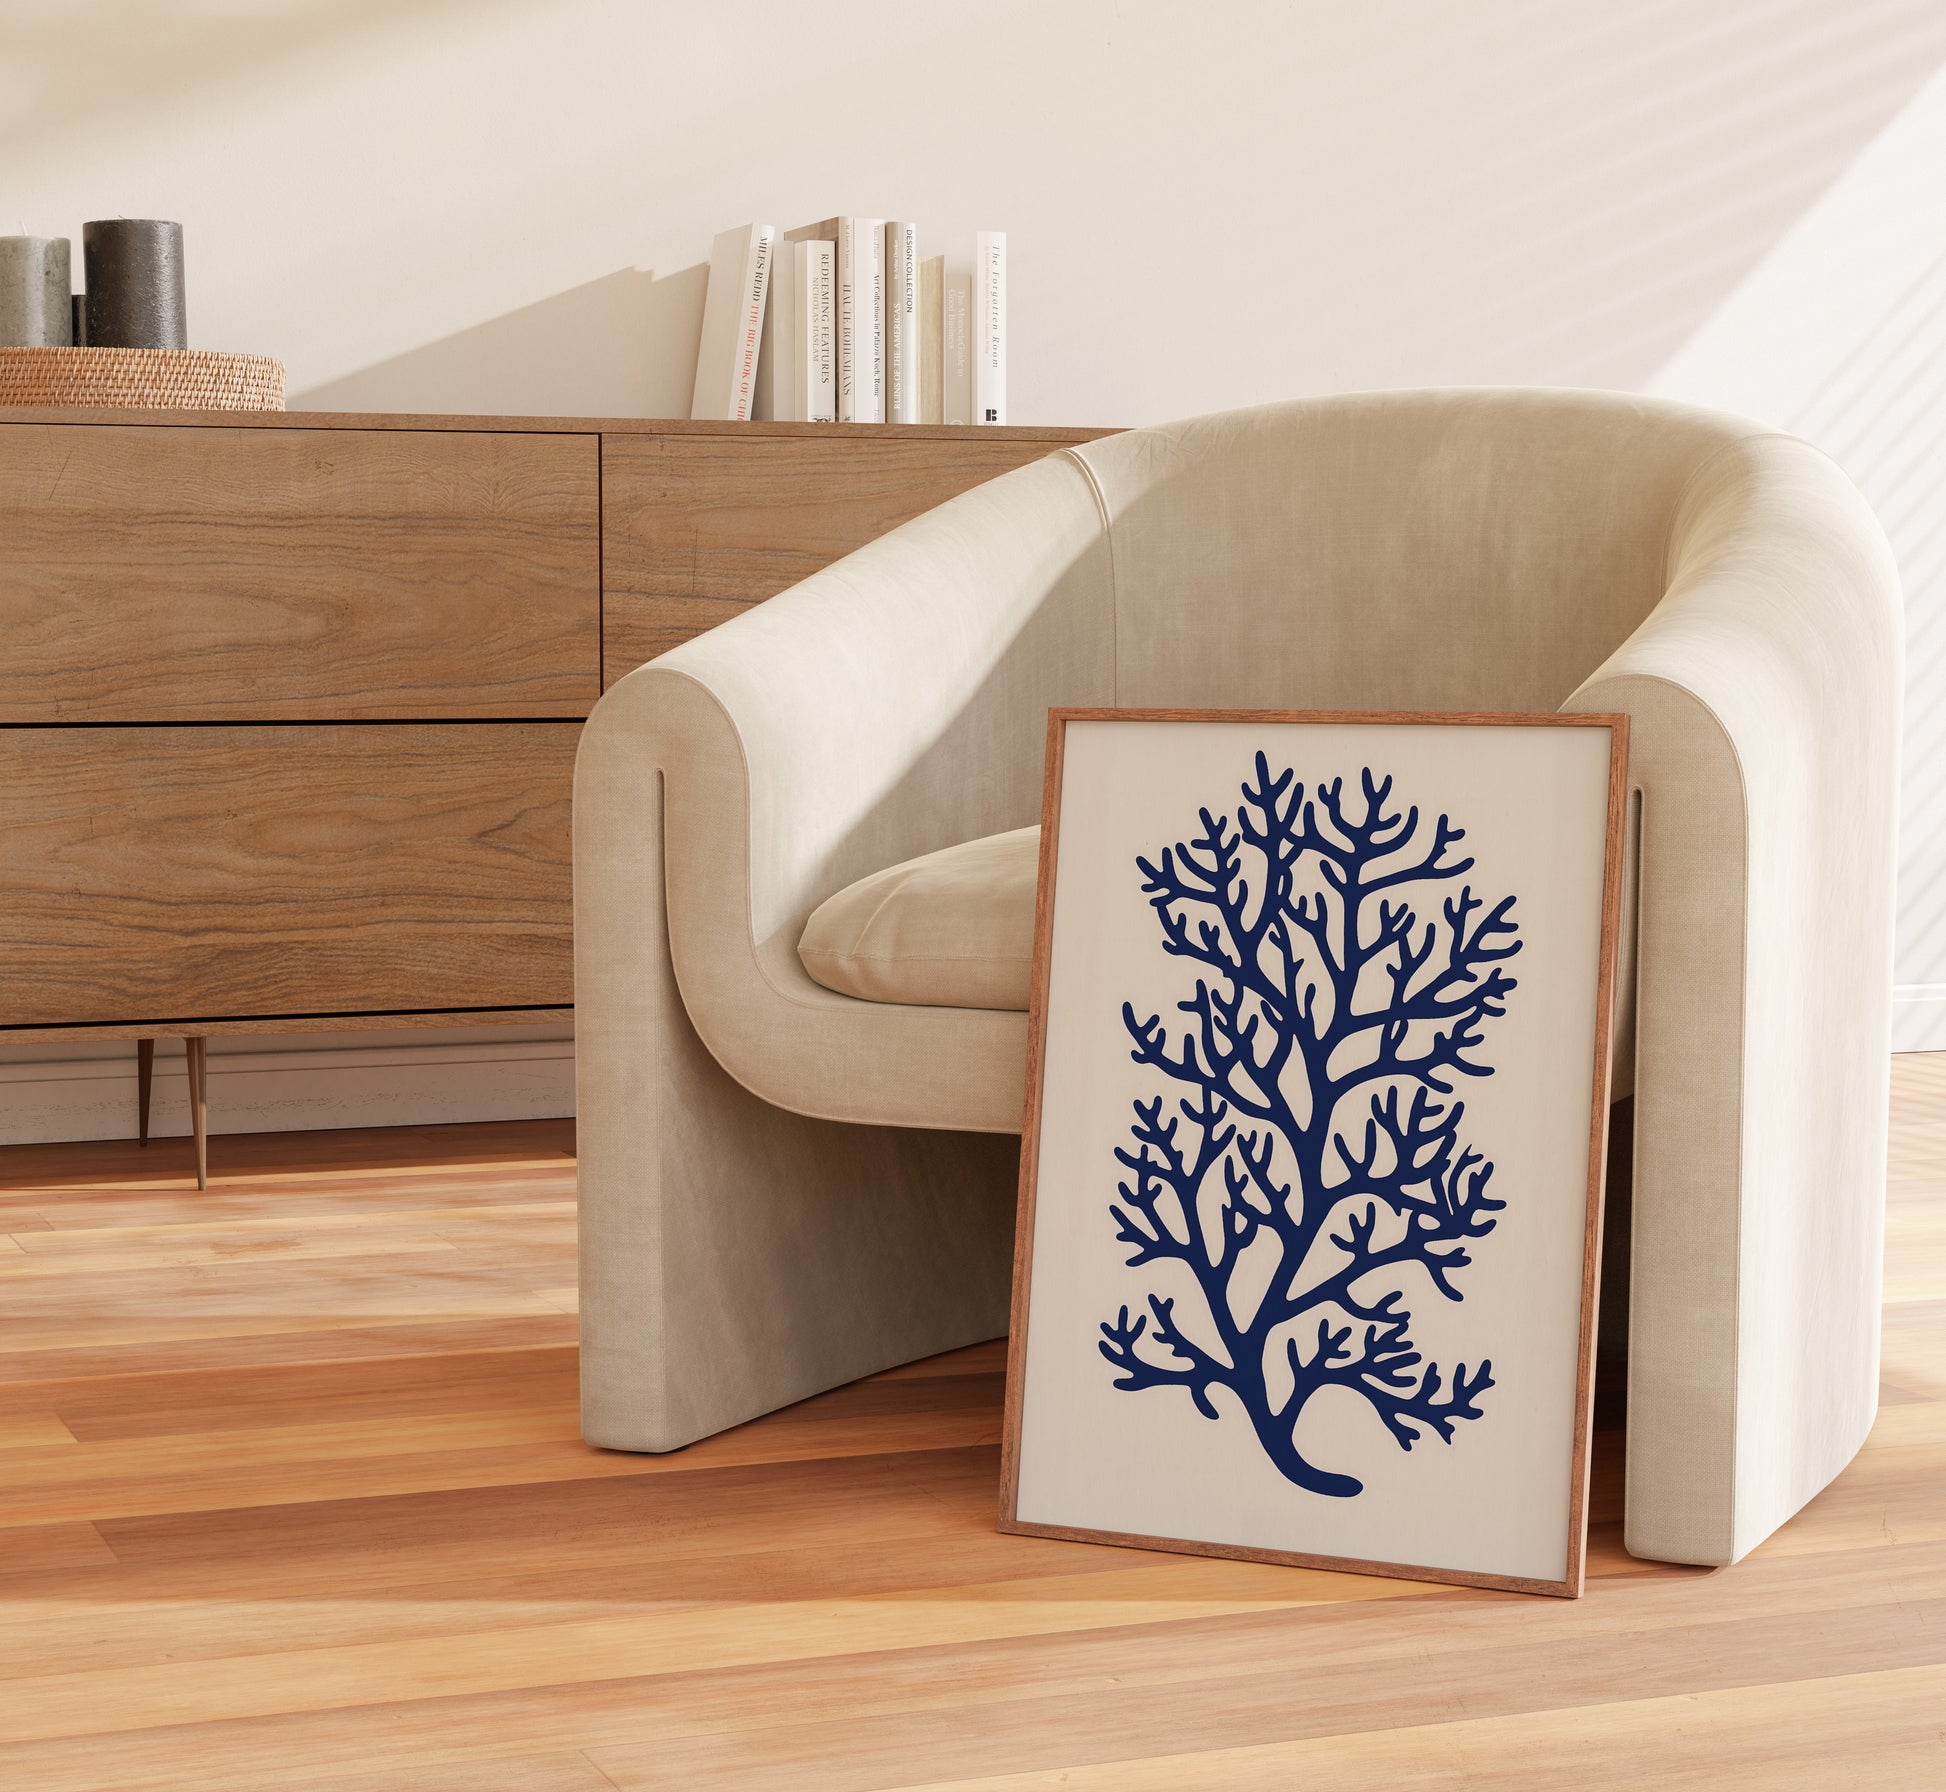 A cozy armchair beside a wooden sideboard with a framed coral illustration leaning against the wall.